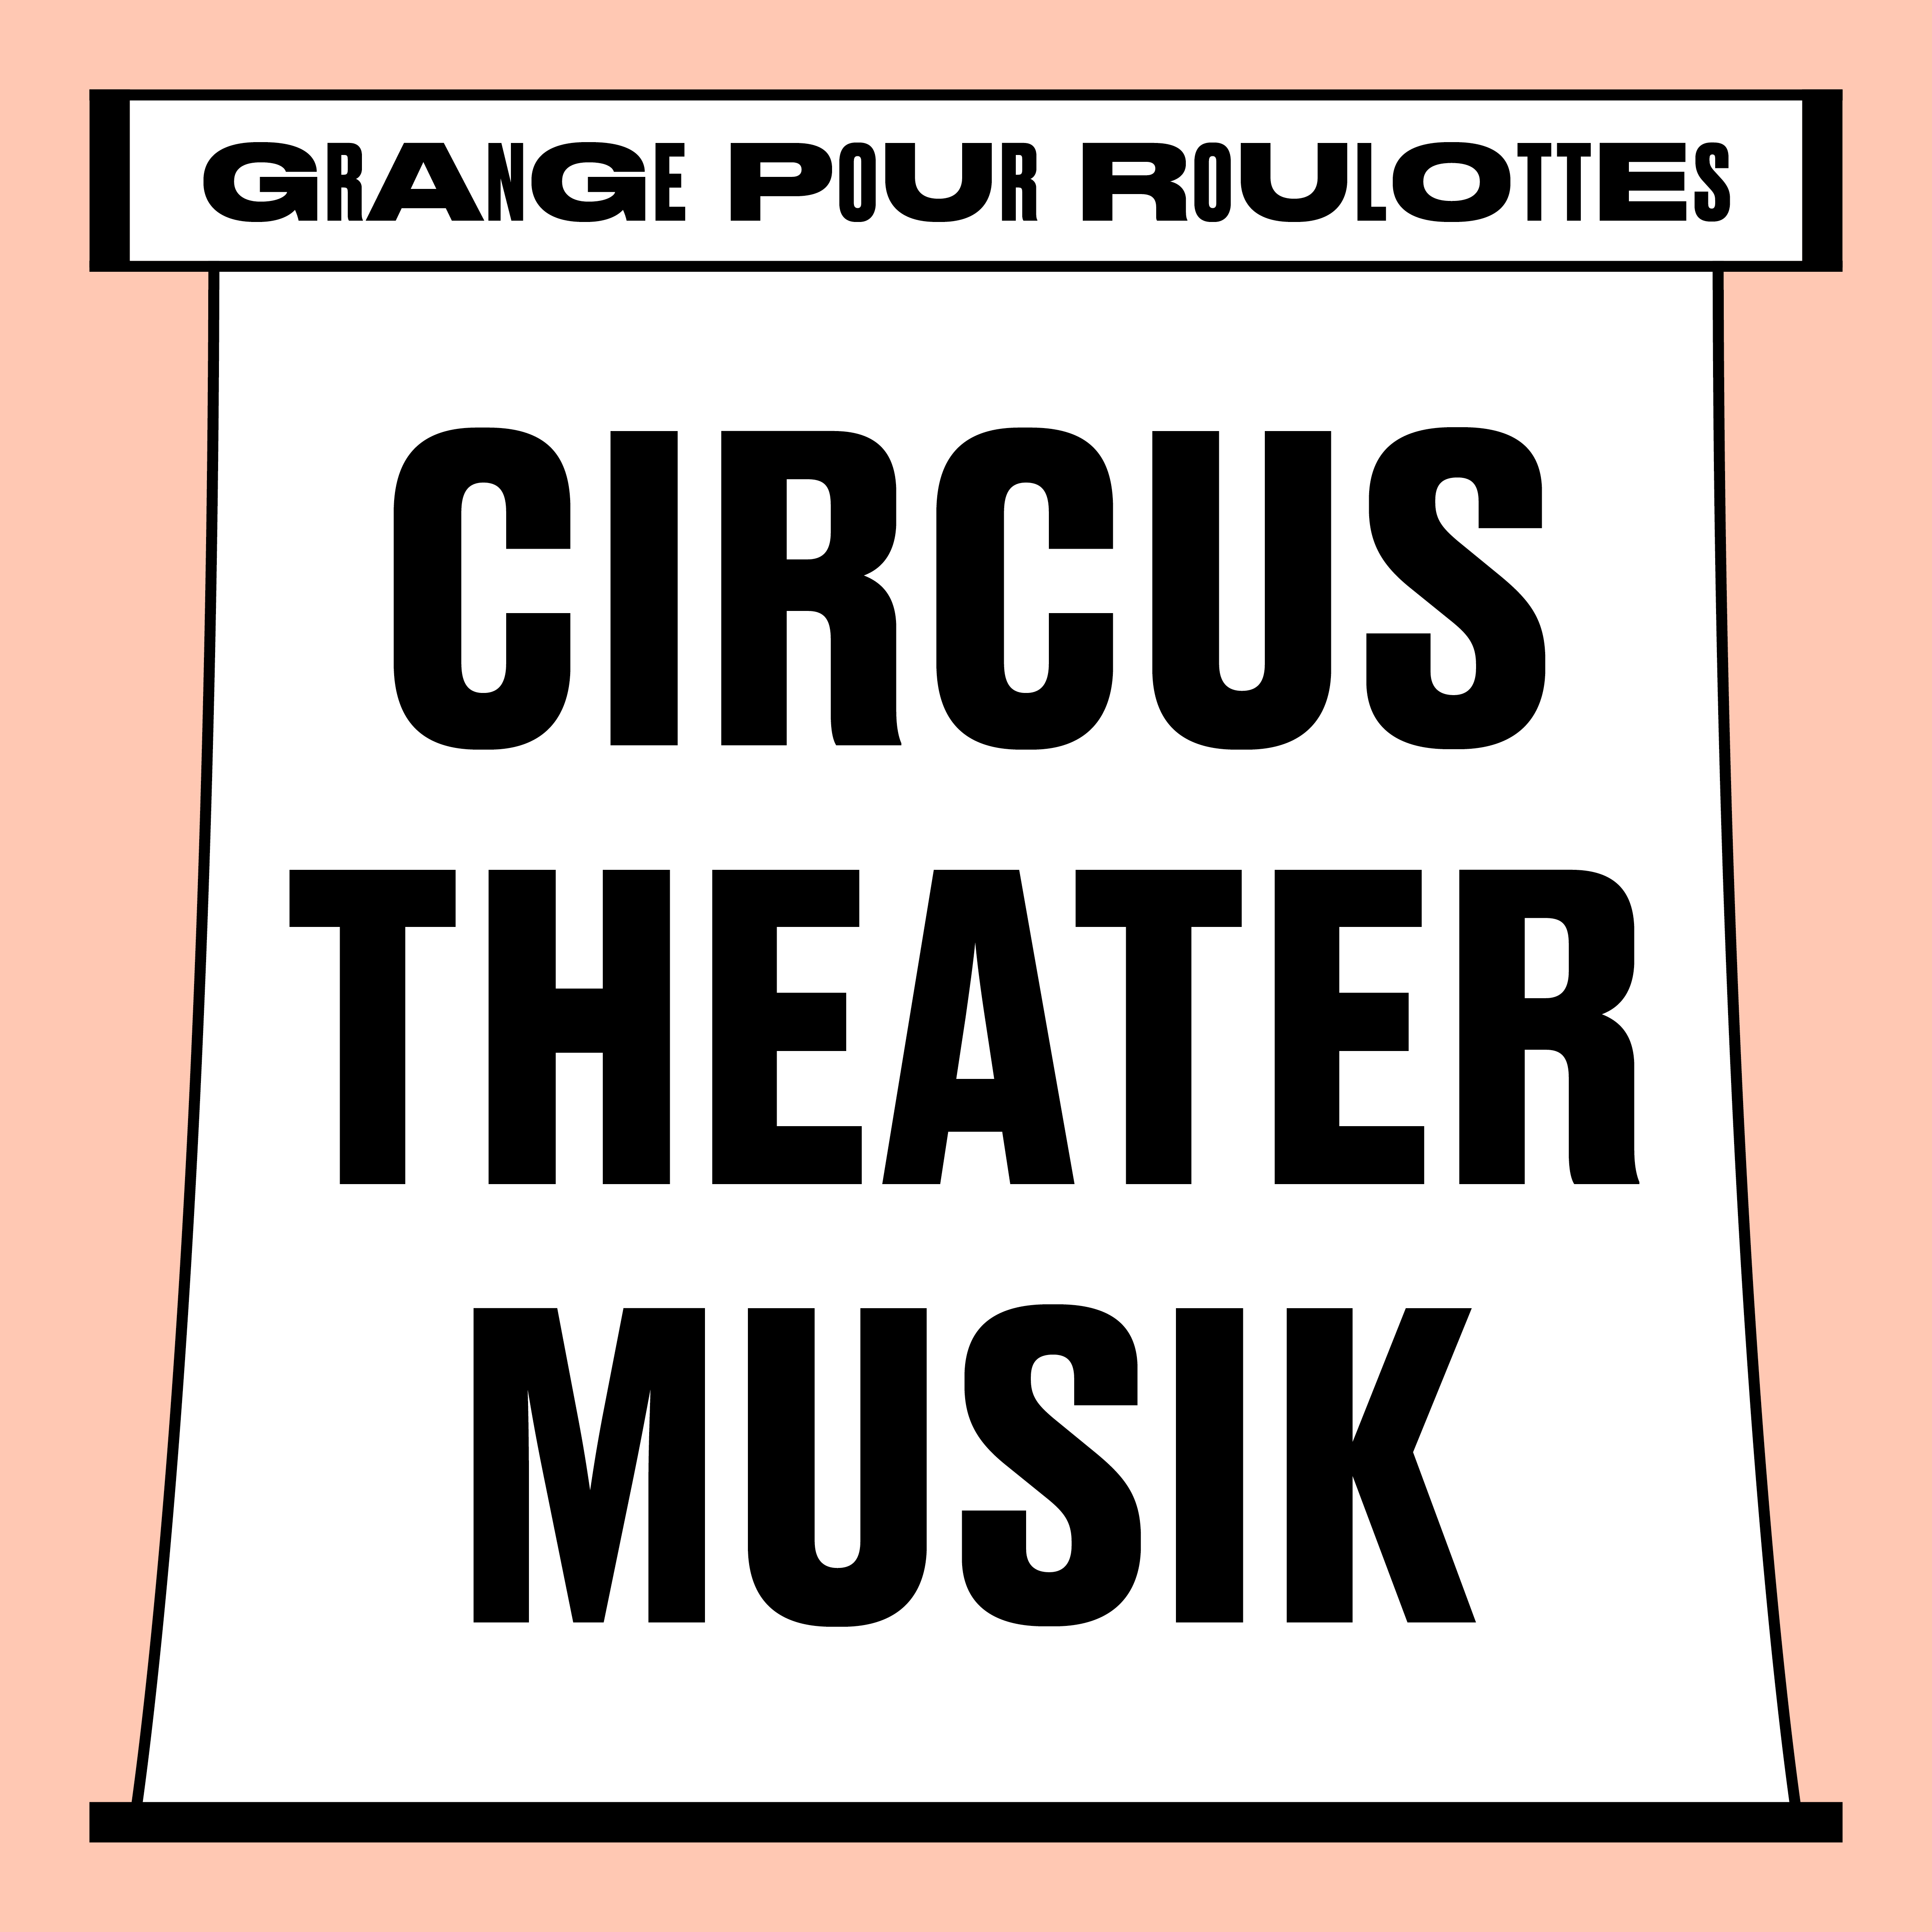 Captns – Auftritt Theater Grange pour Roulottes in Erlach – Circus Theater Musik